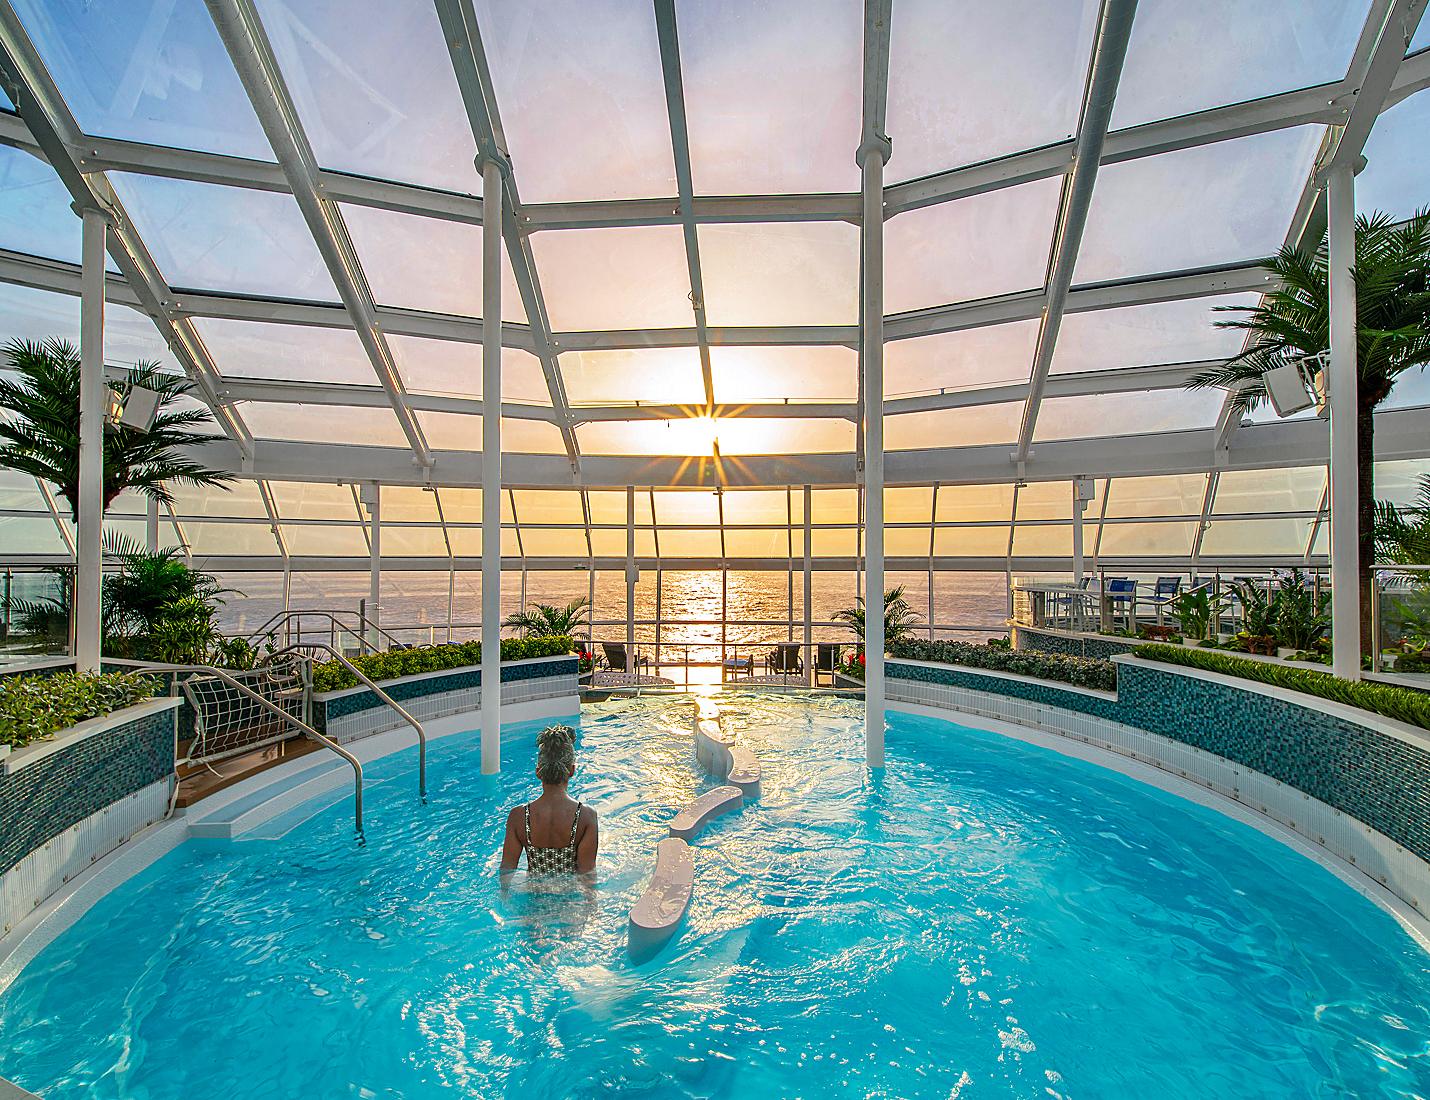 Top 5 things to do on Royal Caribbean for adults | Royal Caribbean Blog